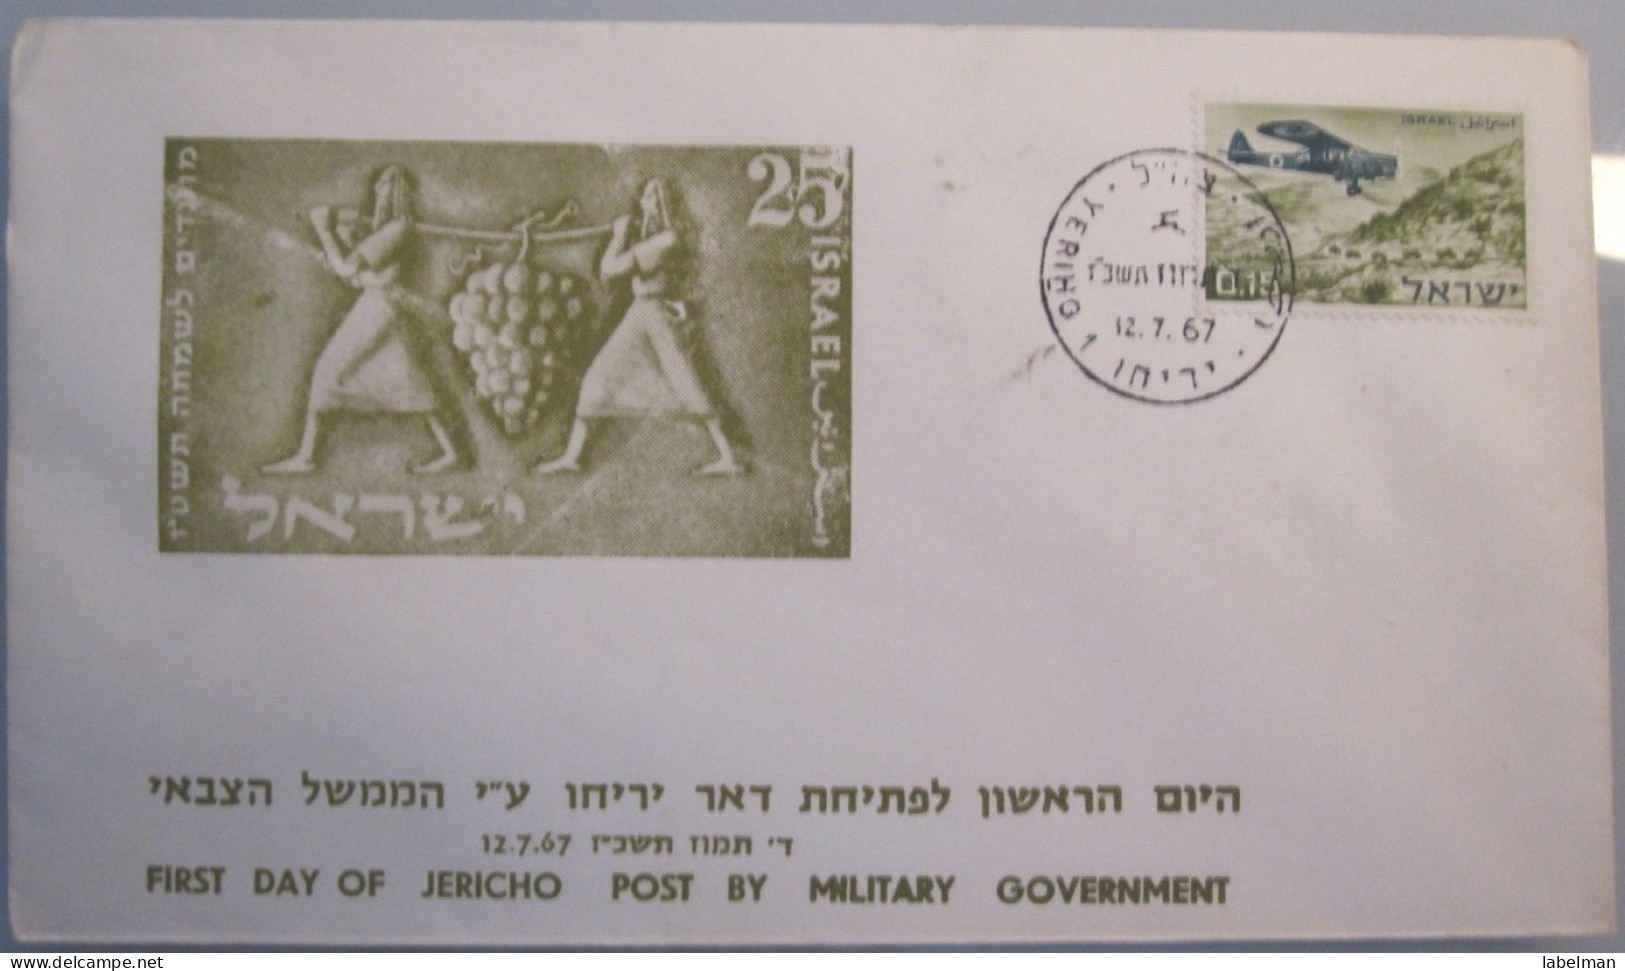 1967 POO FIRST DAY POST OFFICE OPENING MILITARY GOVERNMENT JERICHO JORDAN VALLEY 6 DAYS WAR COVER ISRAEL CACHET - Covers & Documents